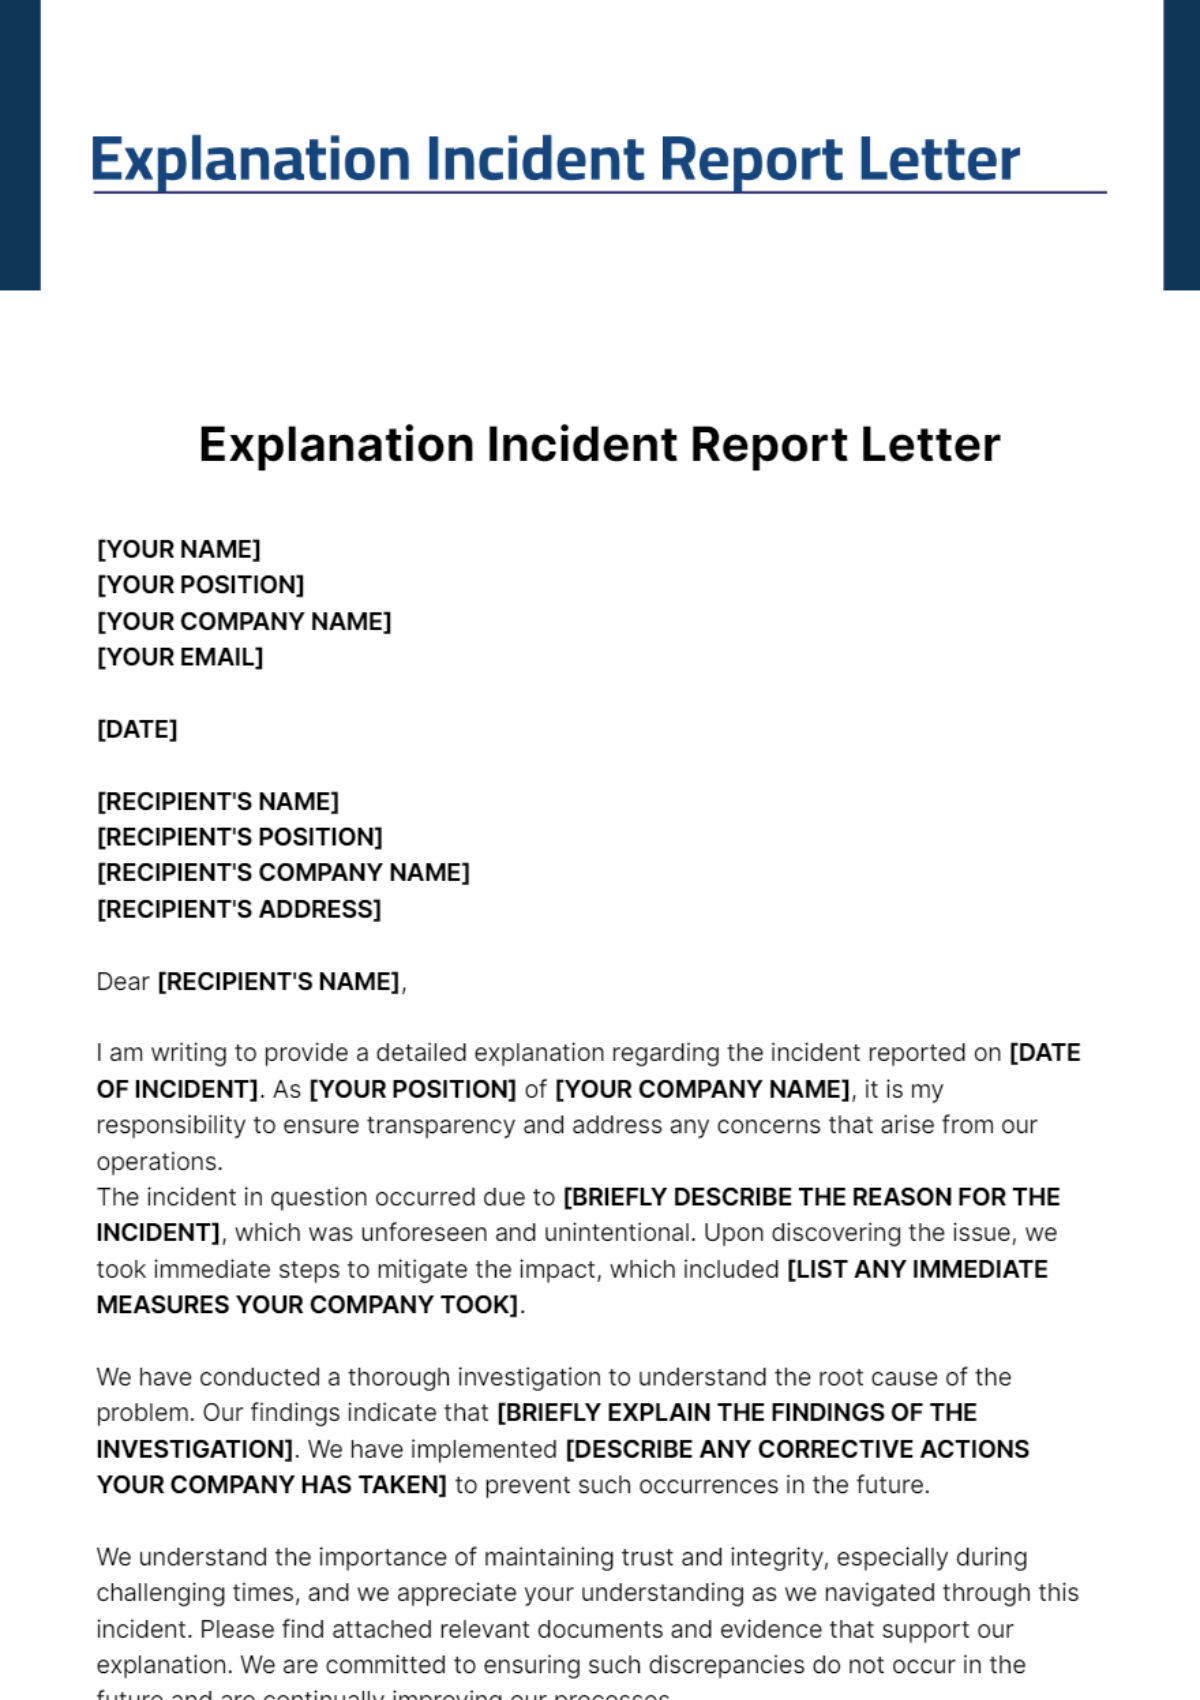 Explanation Incident Report Letter Template